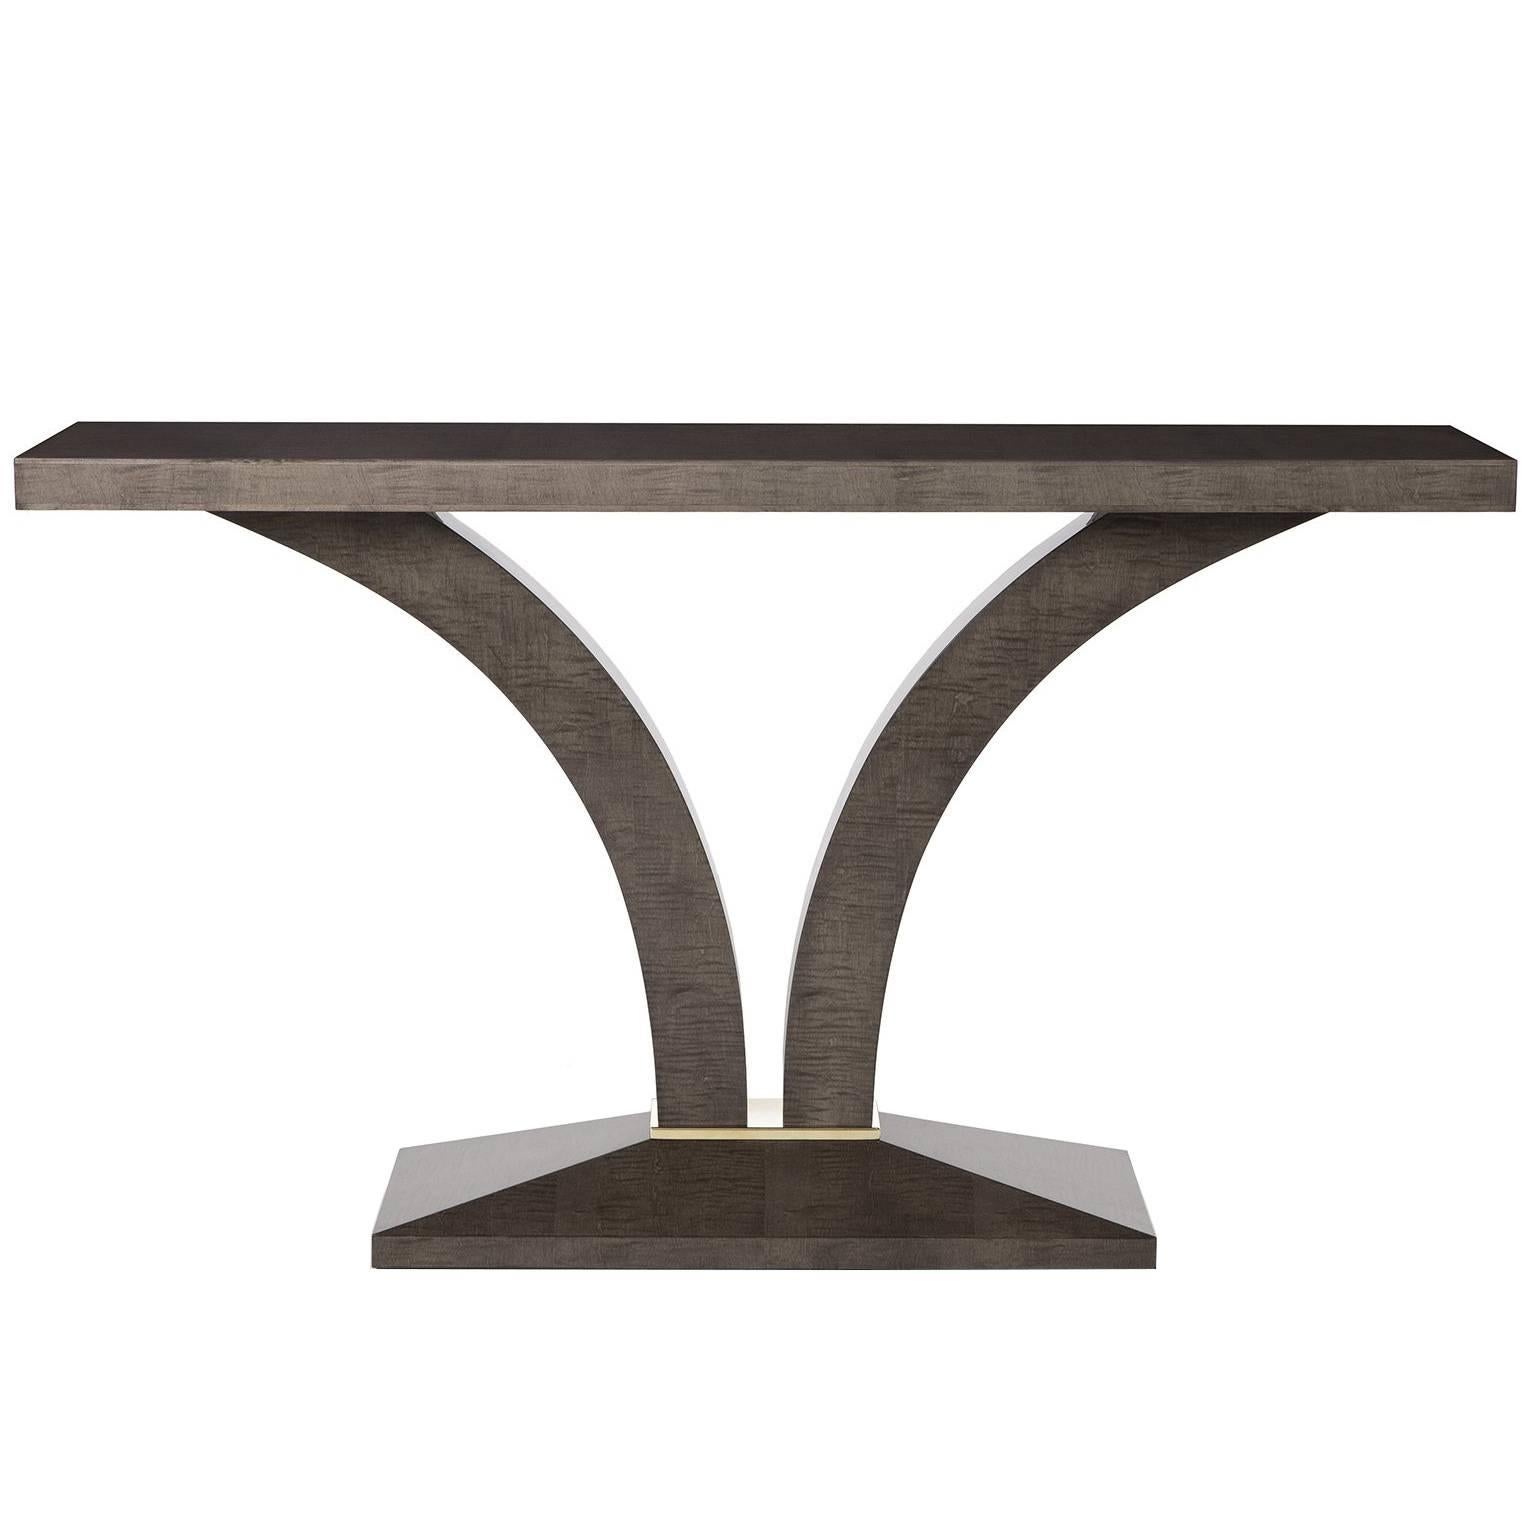 Davidson's Modern, Stanbury Console Table, Sycamore Dusk Wood and Polished Brass